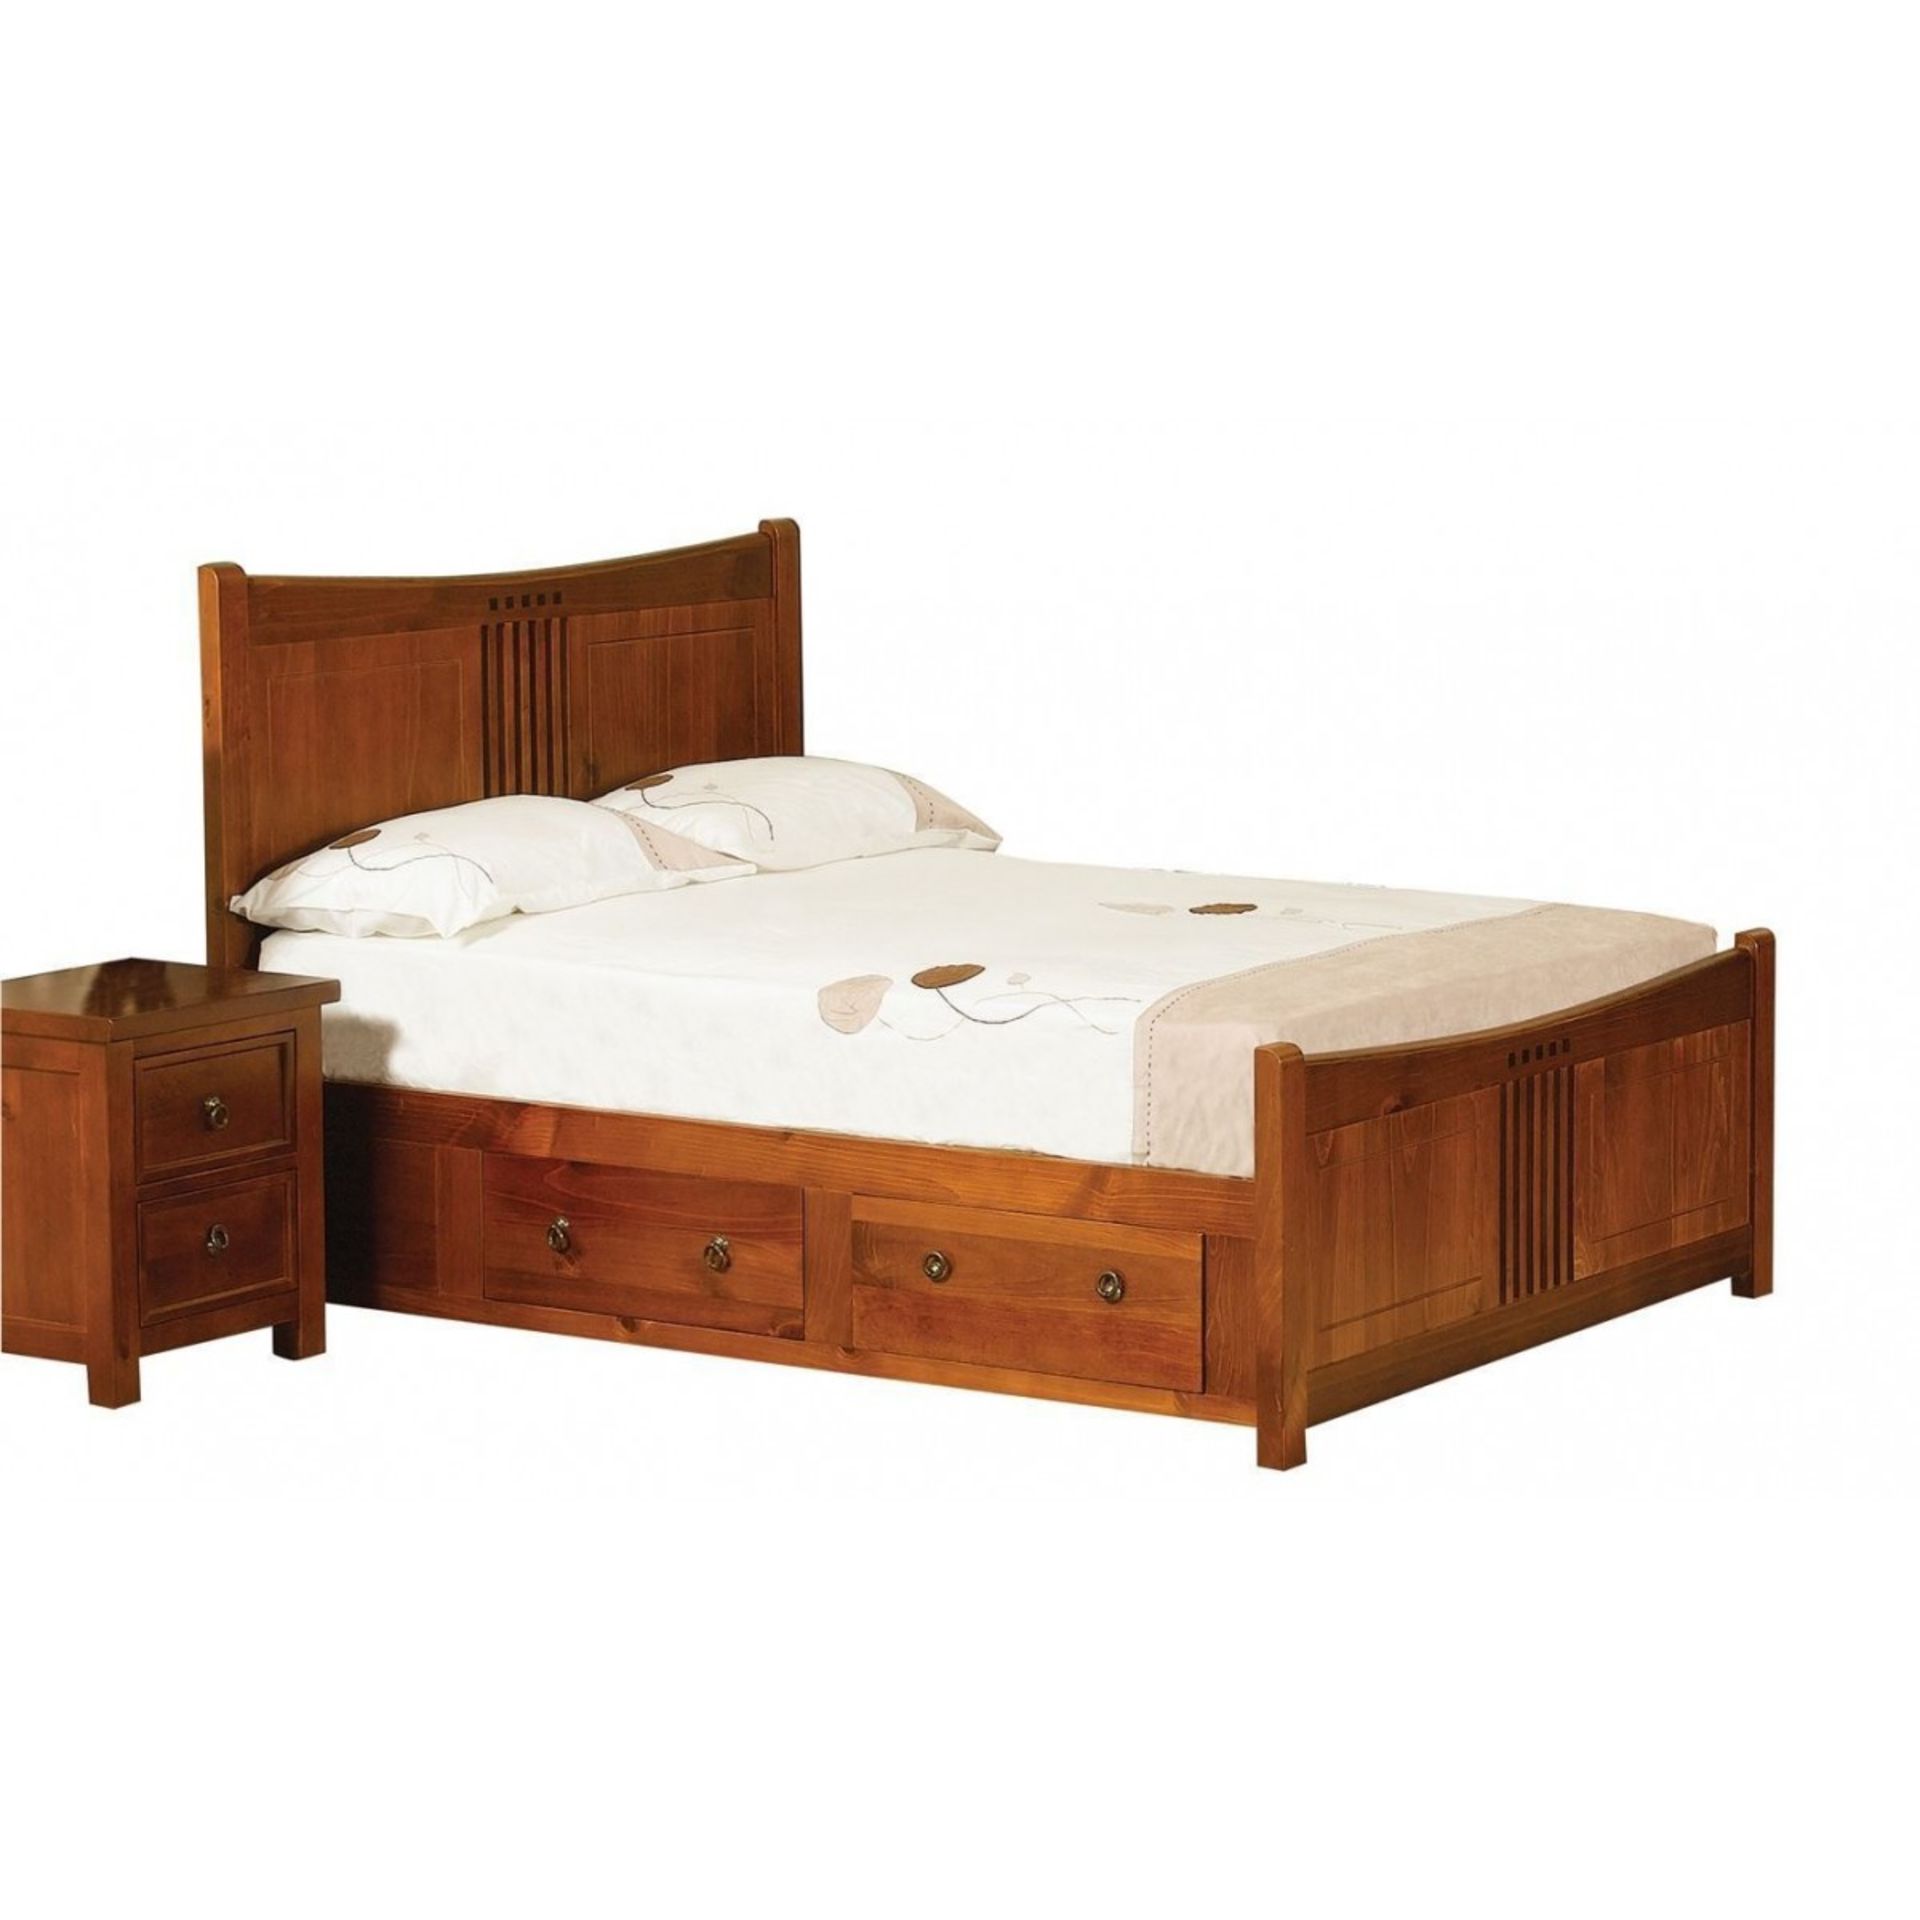 Boxed Marlo Kingsize Cherrywood Poster Bed RRP £500 (Sourced From A High End Furniture